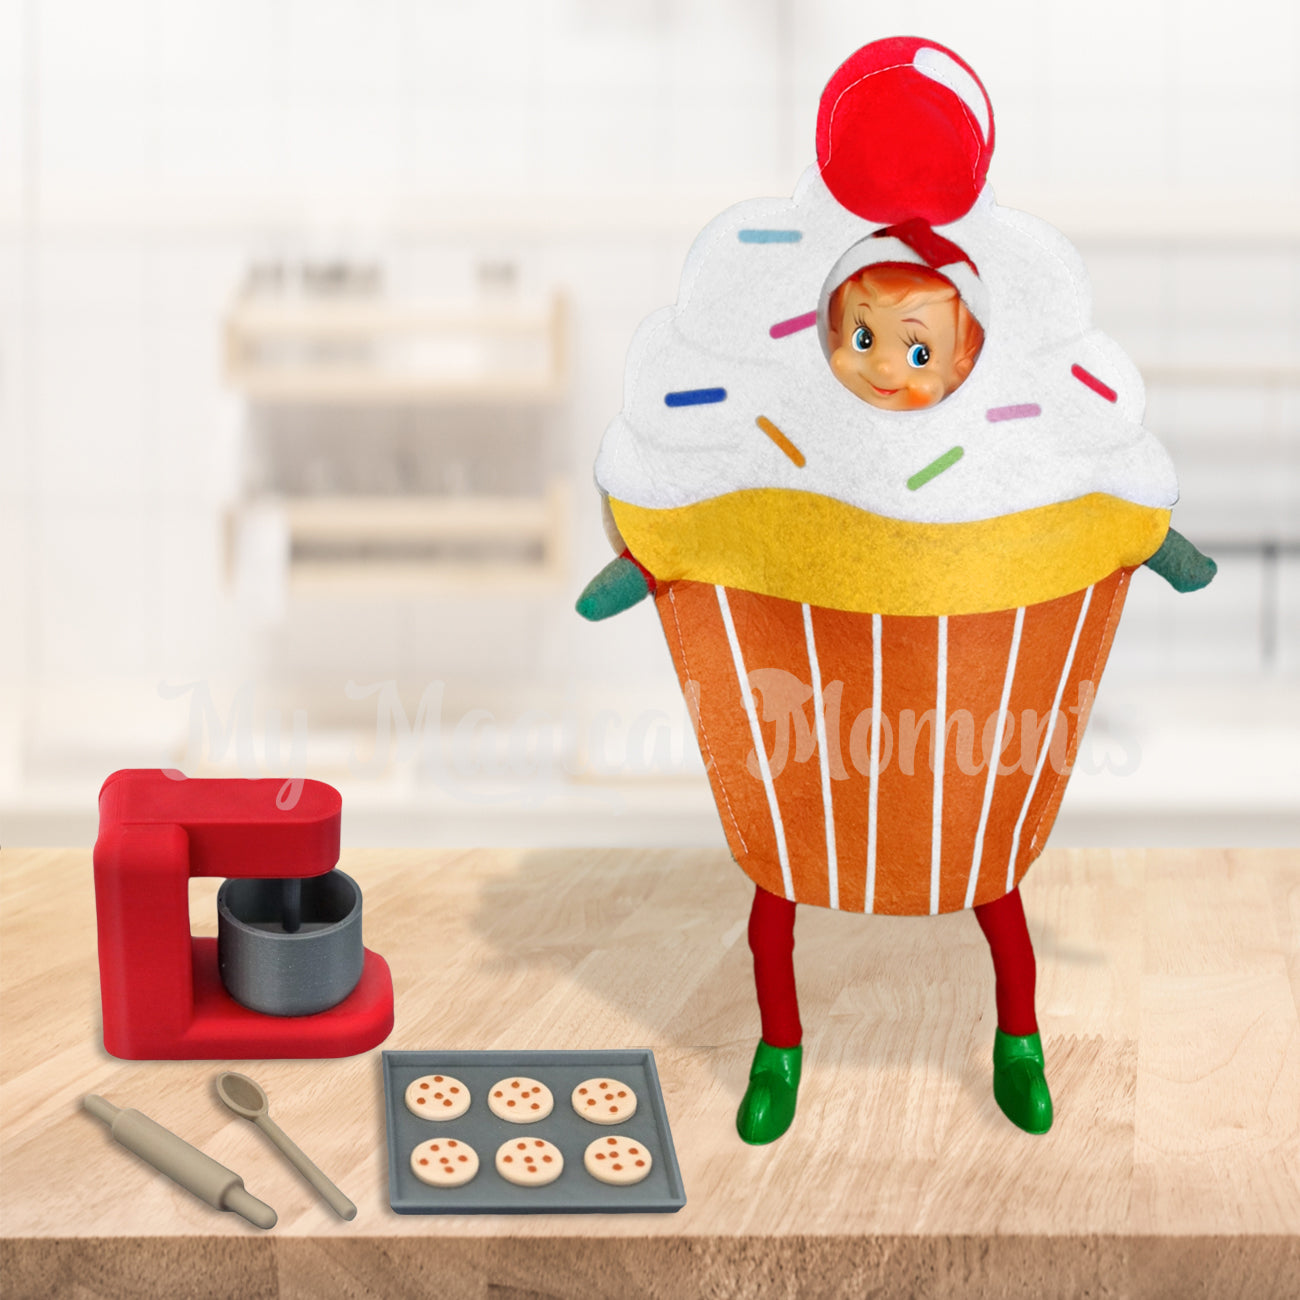 Elf as a cupcake with a miniature baking set, cookies and rolling pin